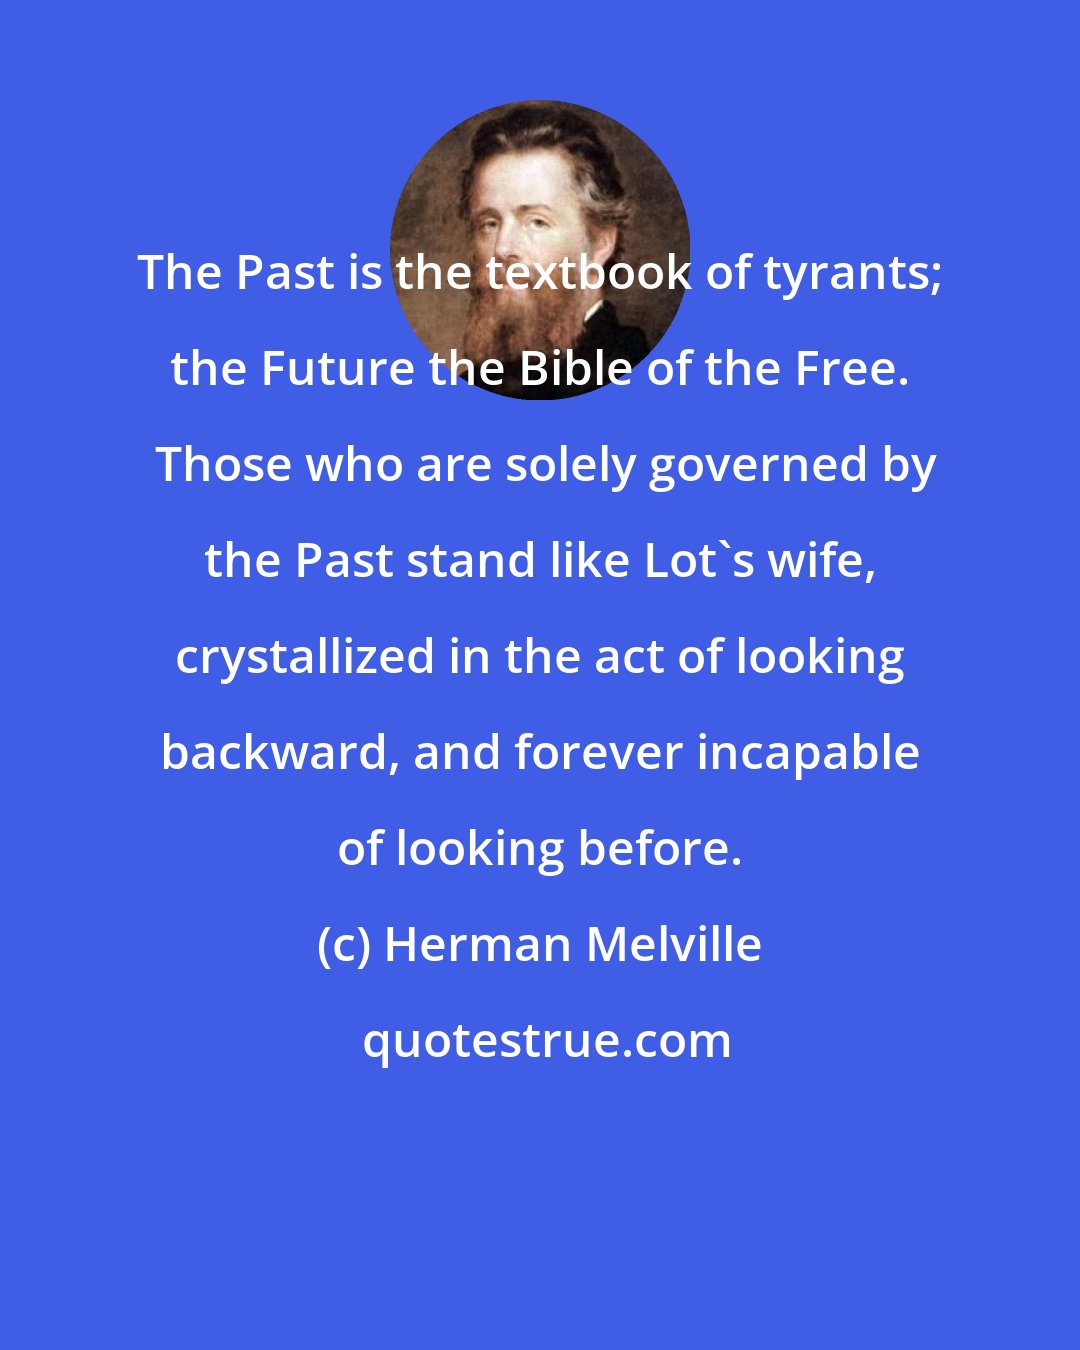 Herman Melville: The Past is the textbook of tyrants; the Future the Bible of the Free.  Those who are solely governed by the Past stand like Lot's wife, crystallized in the act of looking backward, and forever incapable of looking before.